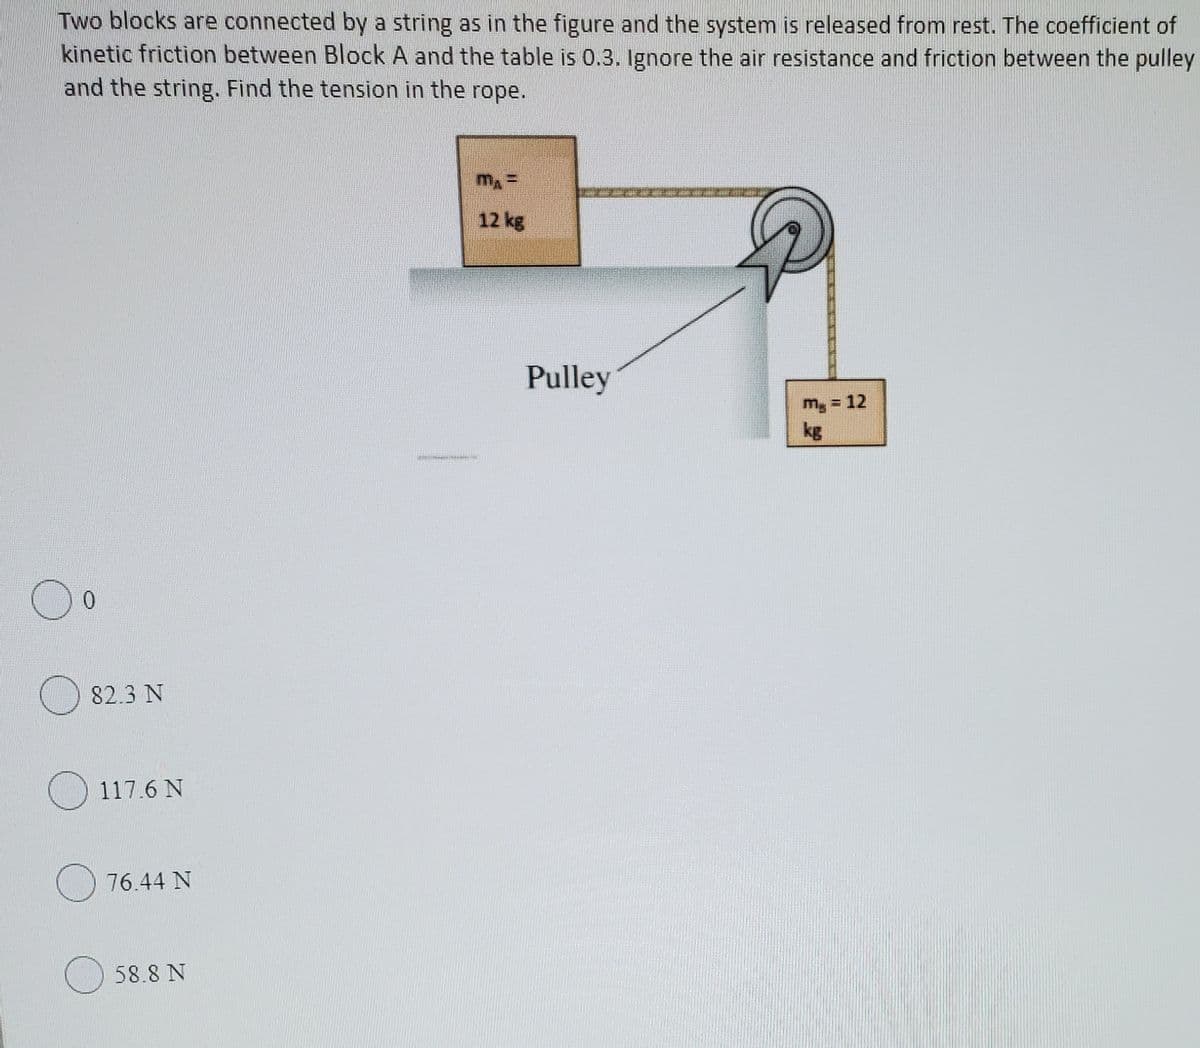 Two blocks are connected by a string as in the figure and the system is released from rest. The coefficient of
kinetic friction between Block A and the table is 0.3. Ignore the air resistance and friction between the pulley
and the string. Find the tension in the rope.
12 kg
Pulley
m, = 12
kg
0.
82.3 N
O 117.6 N
76.44 N
58.8 N
